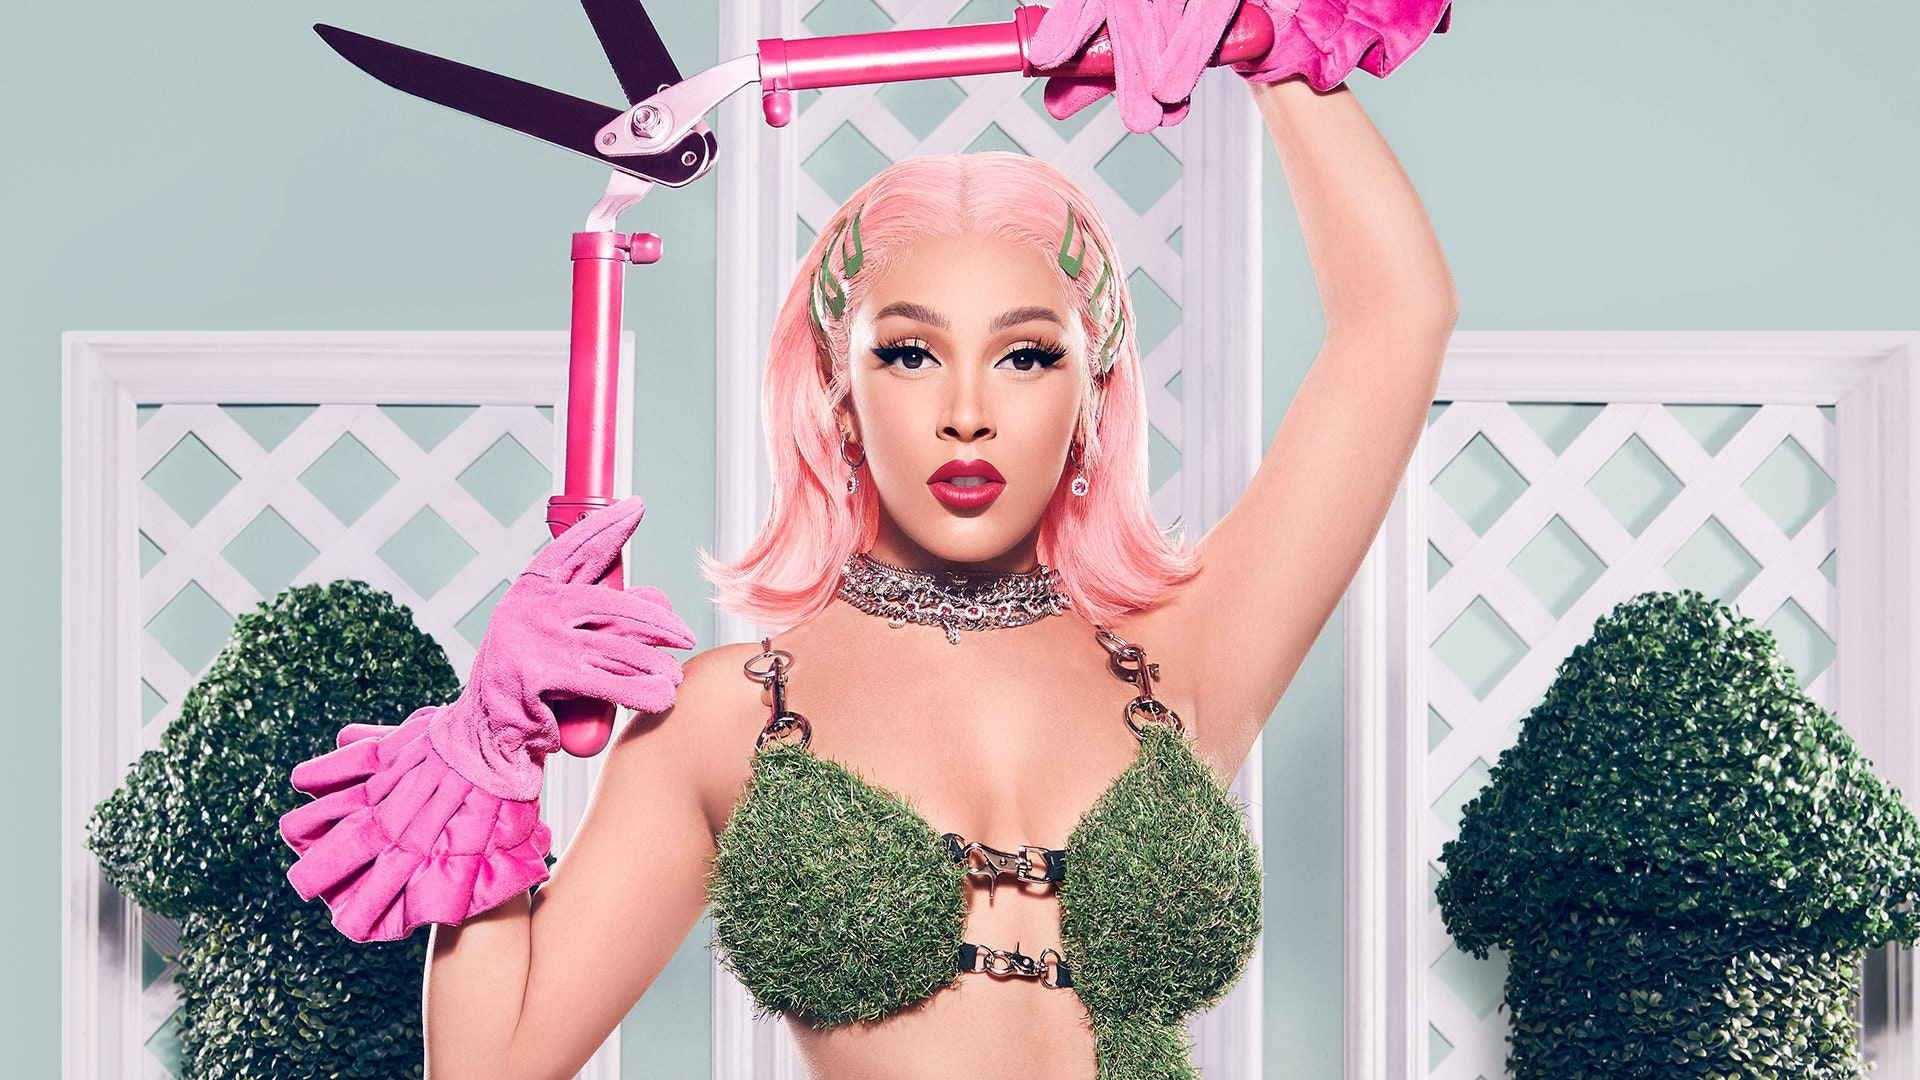 Cardi B in a moss bra and pink gloves holding pink pruning shears - Doja Cat